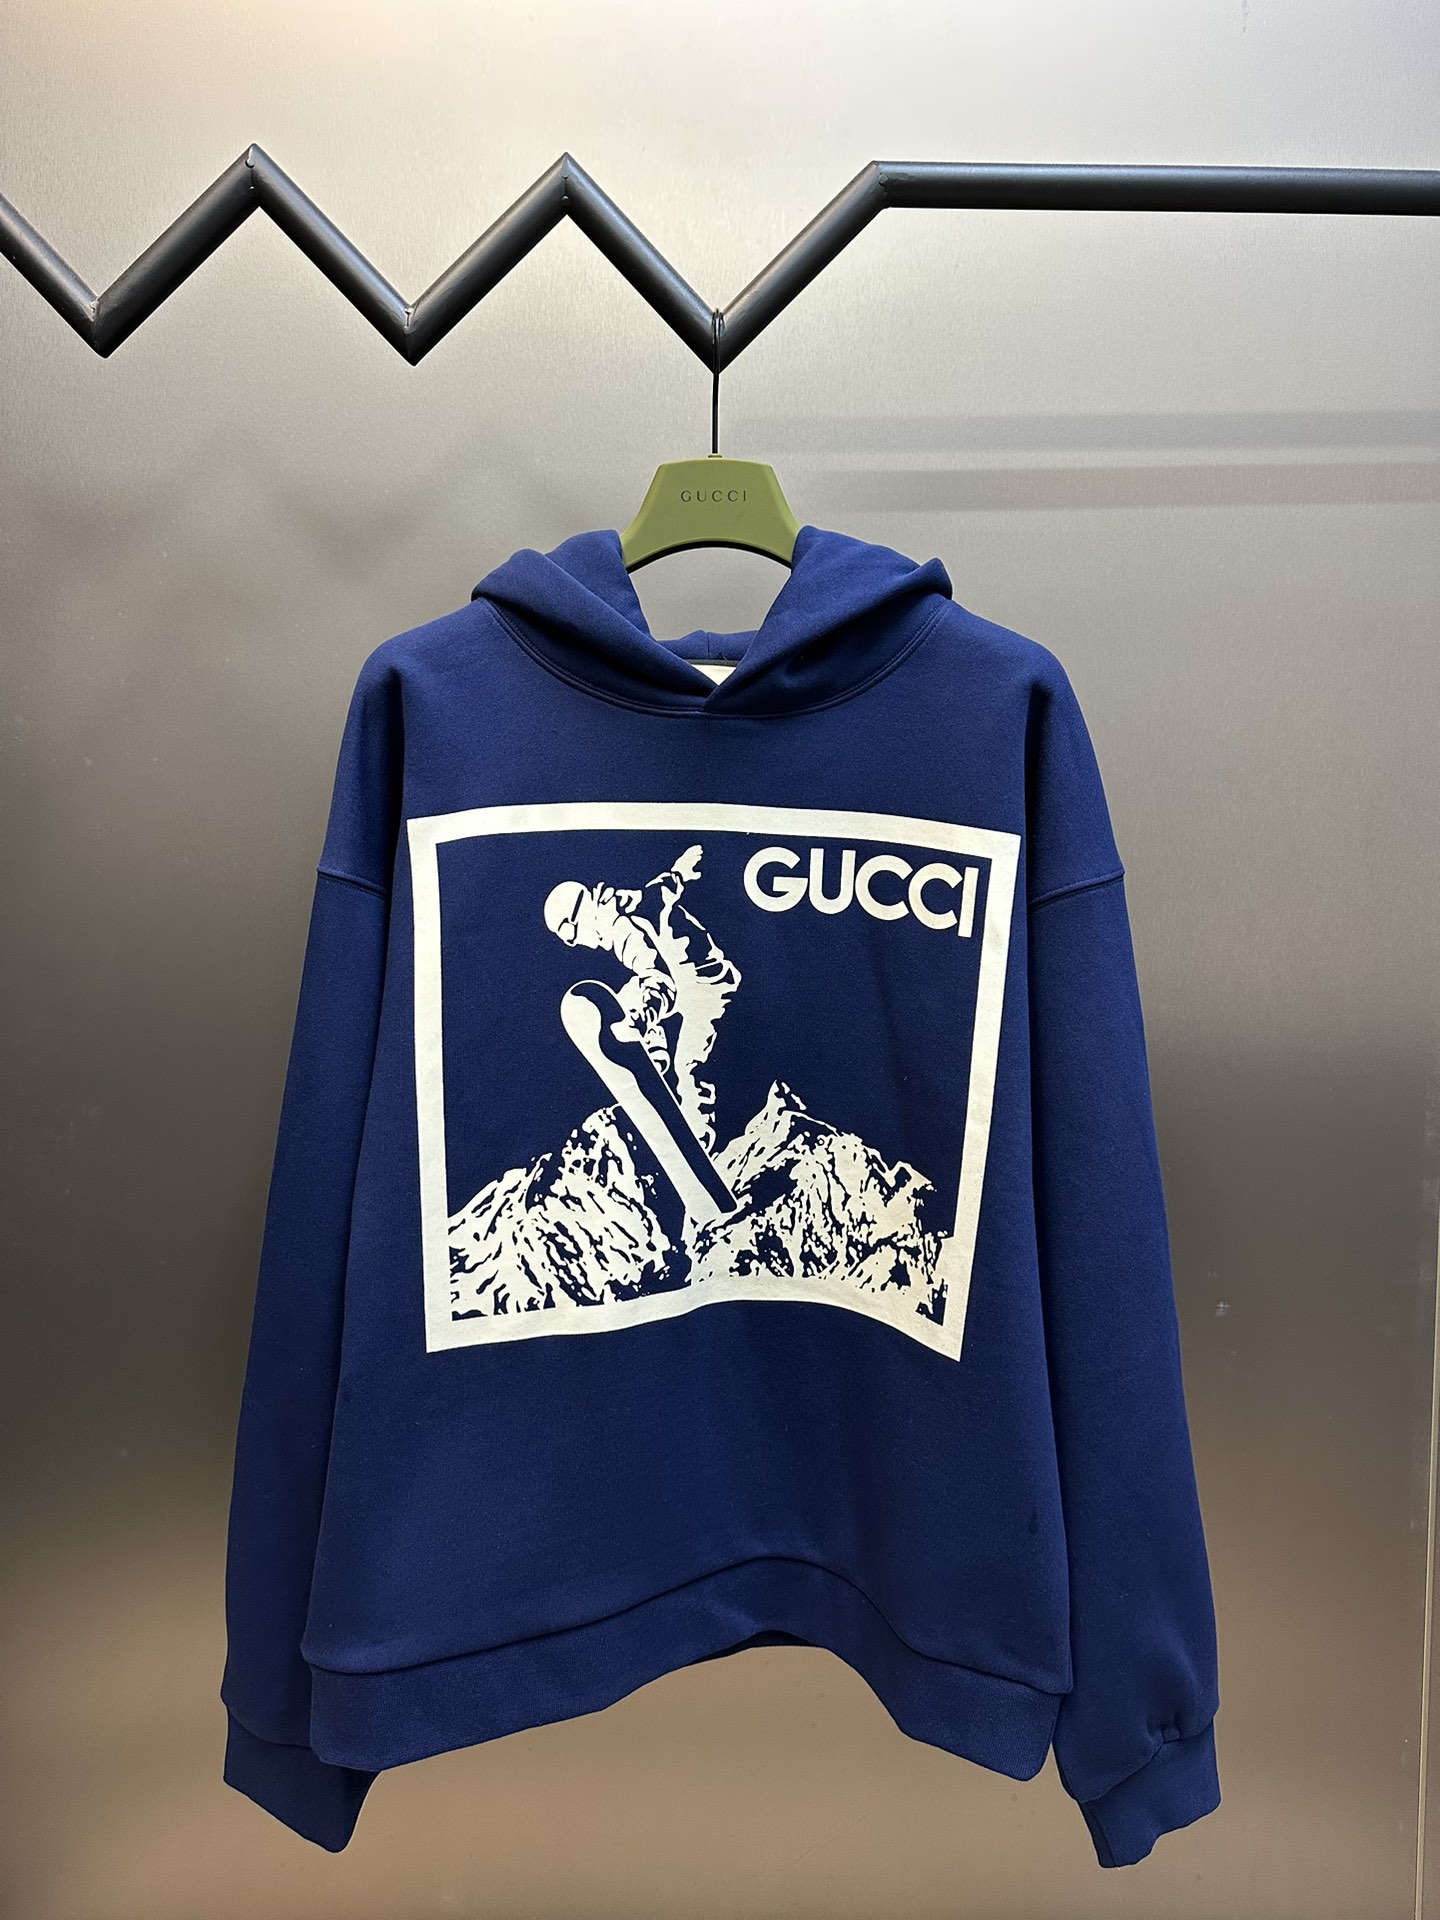 Gucci Good
 Clothing Hoodies Printing Spring Collection Hooded Top